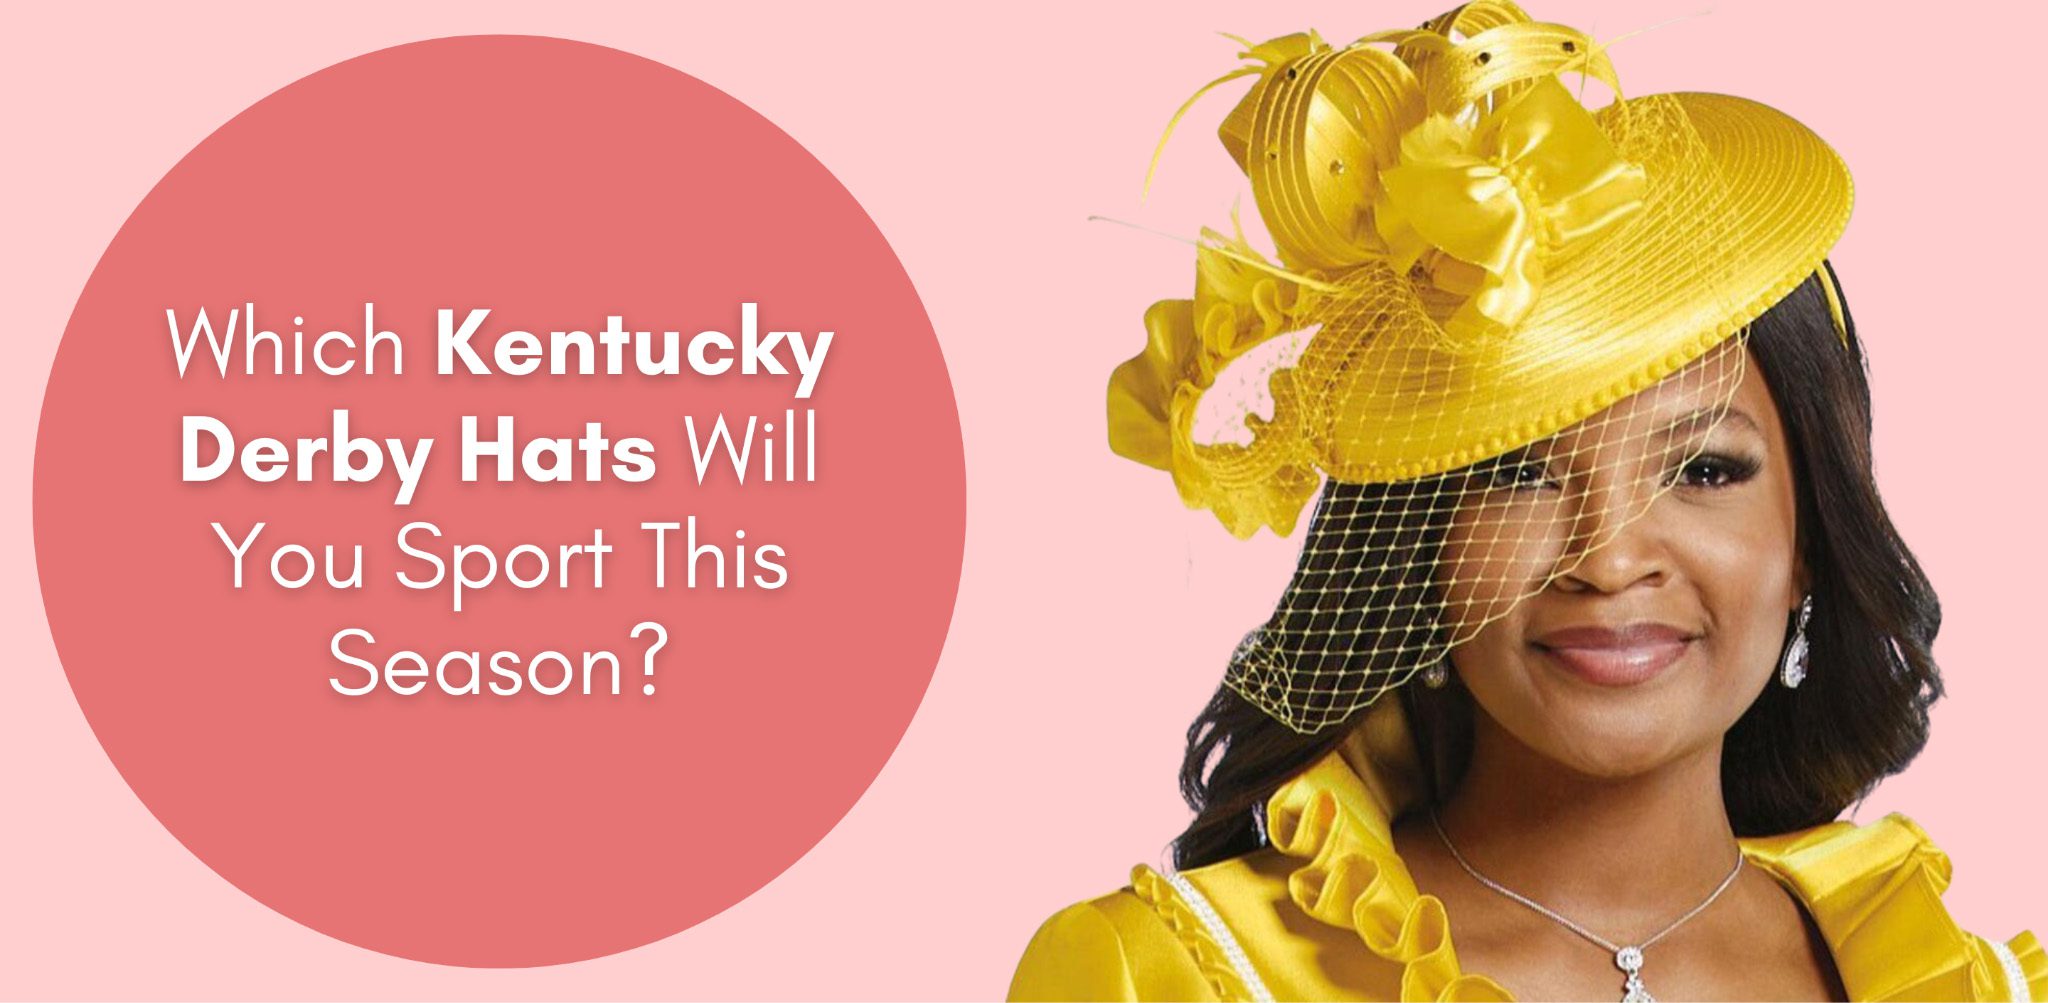 Which Kentucky Derby Hats Will You Sport This Season?